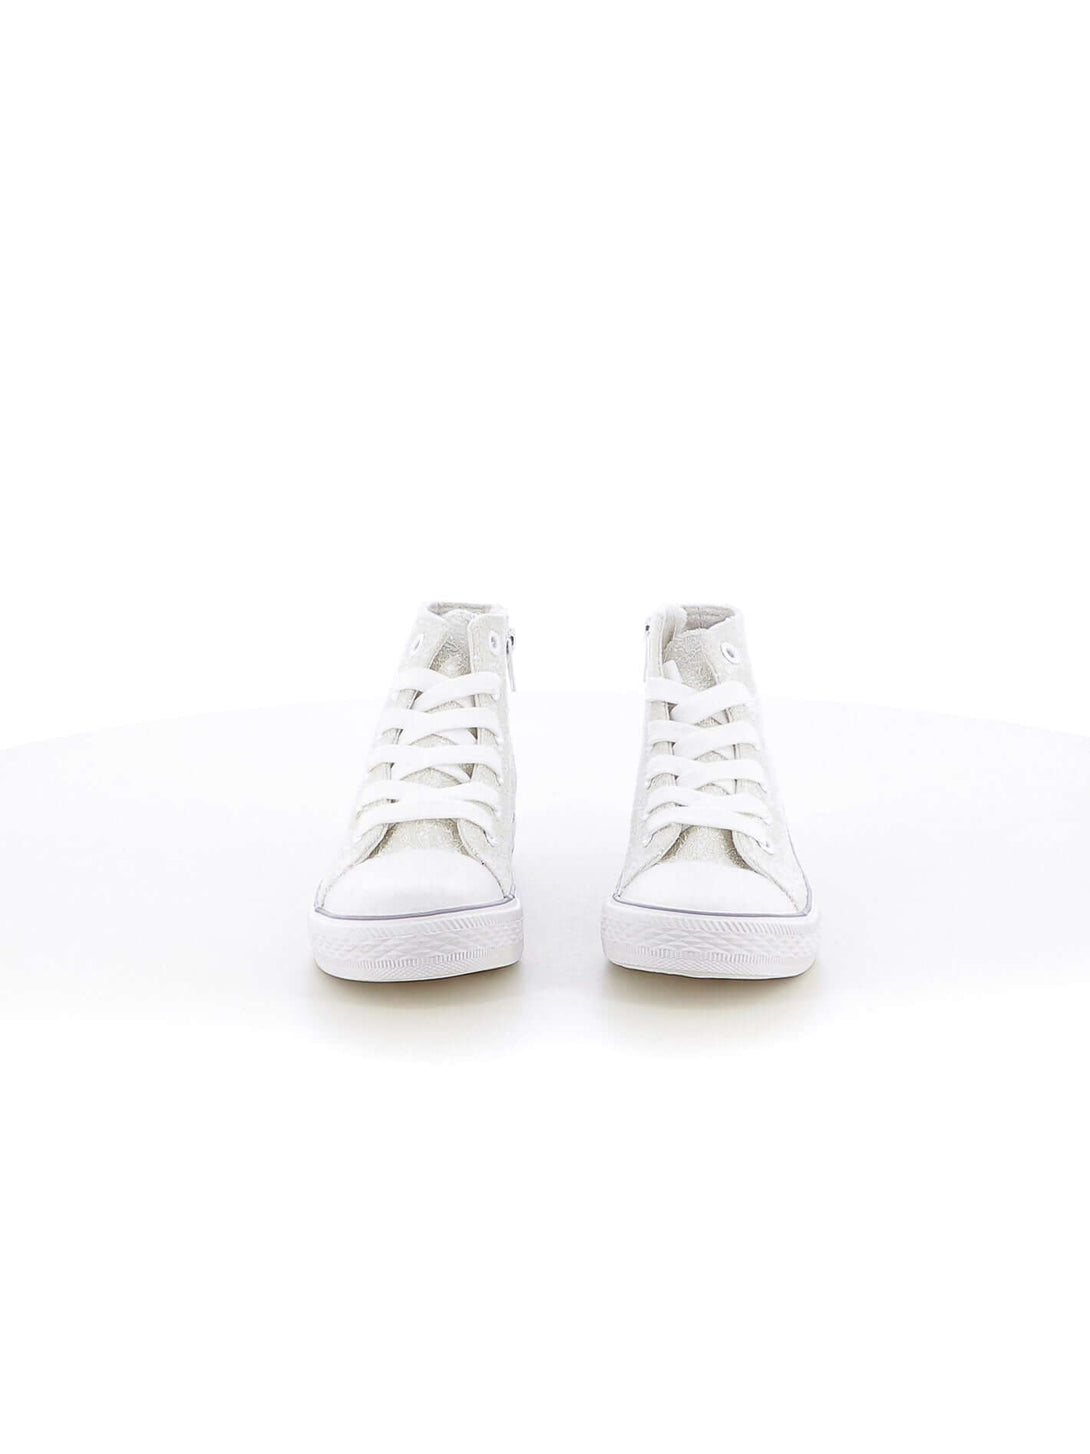 Sneakers in tela bambina LOVE DETAILS 135-729 bianco | Costa Superstore